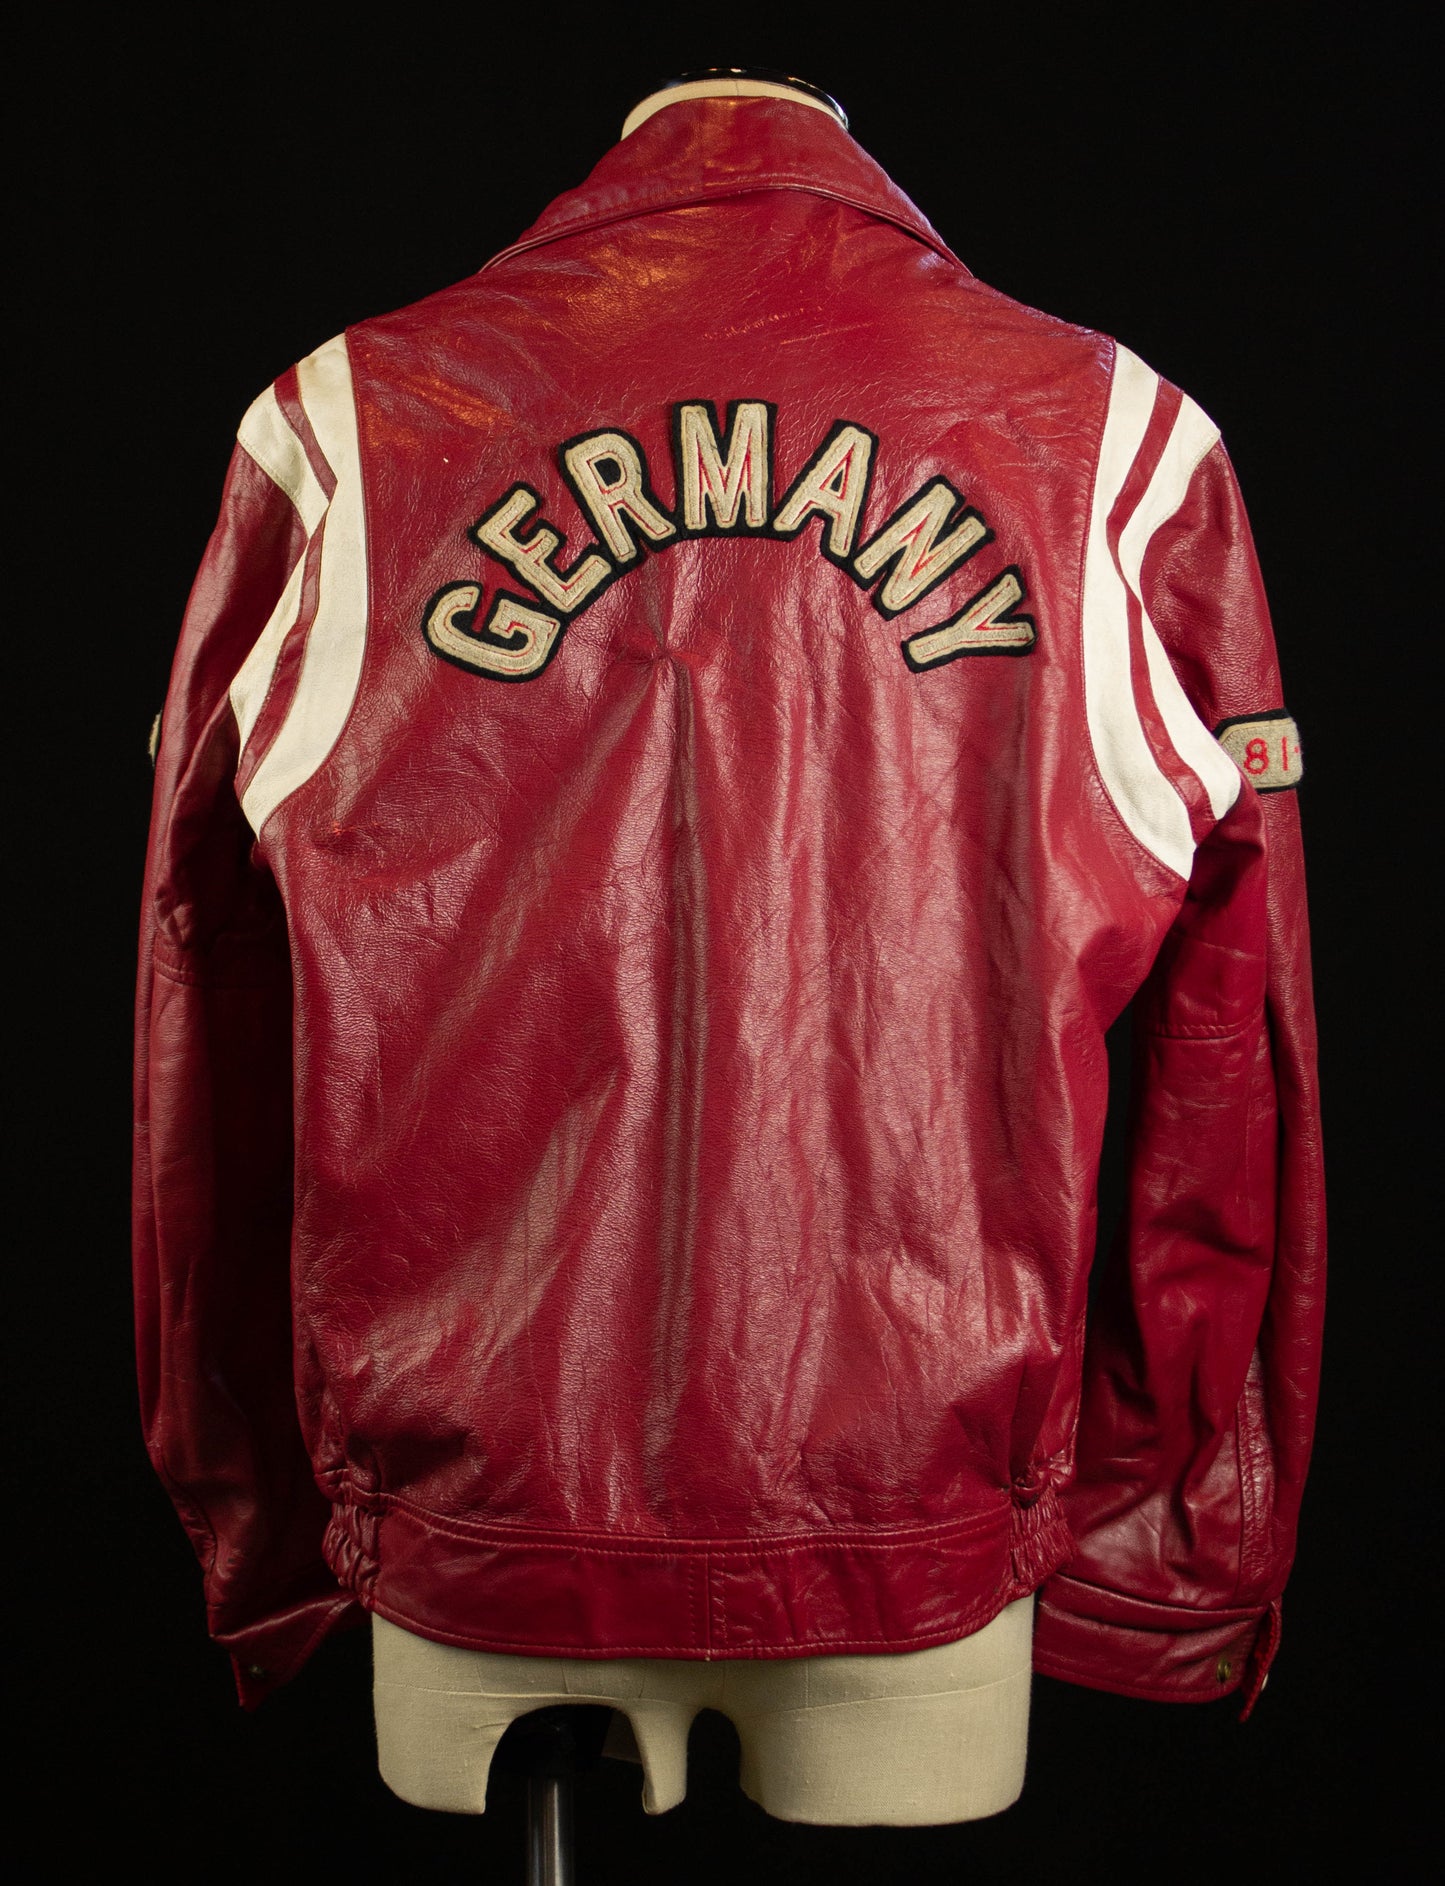 Vintage Germany Letterman Varsity Leather Jacket 1981 LAHR Senior Red and White Patches Large-XL